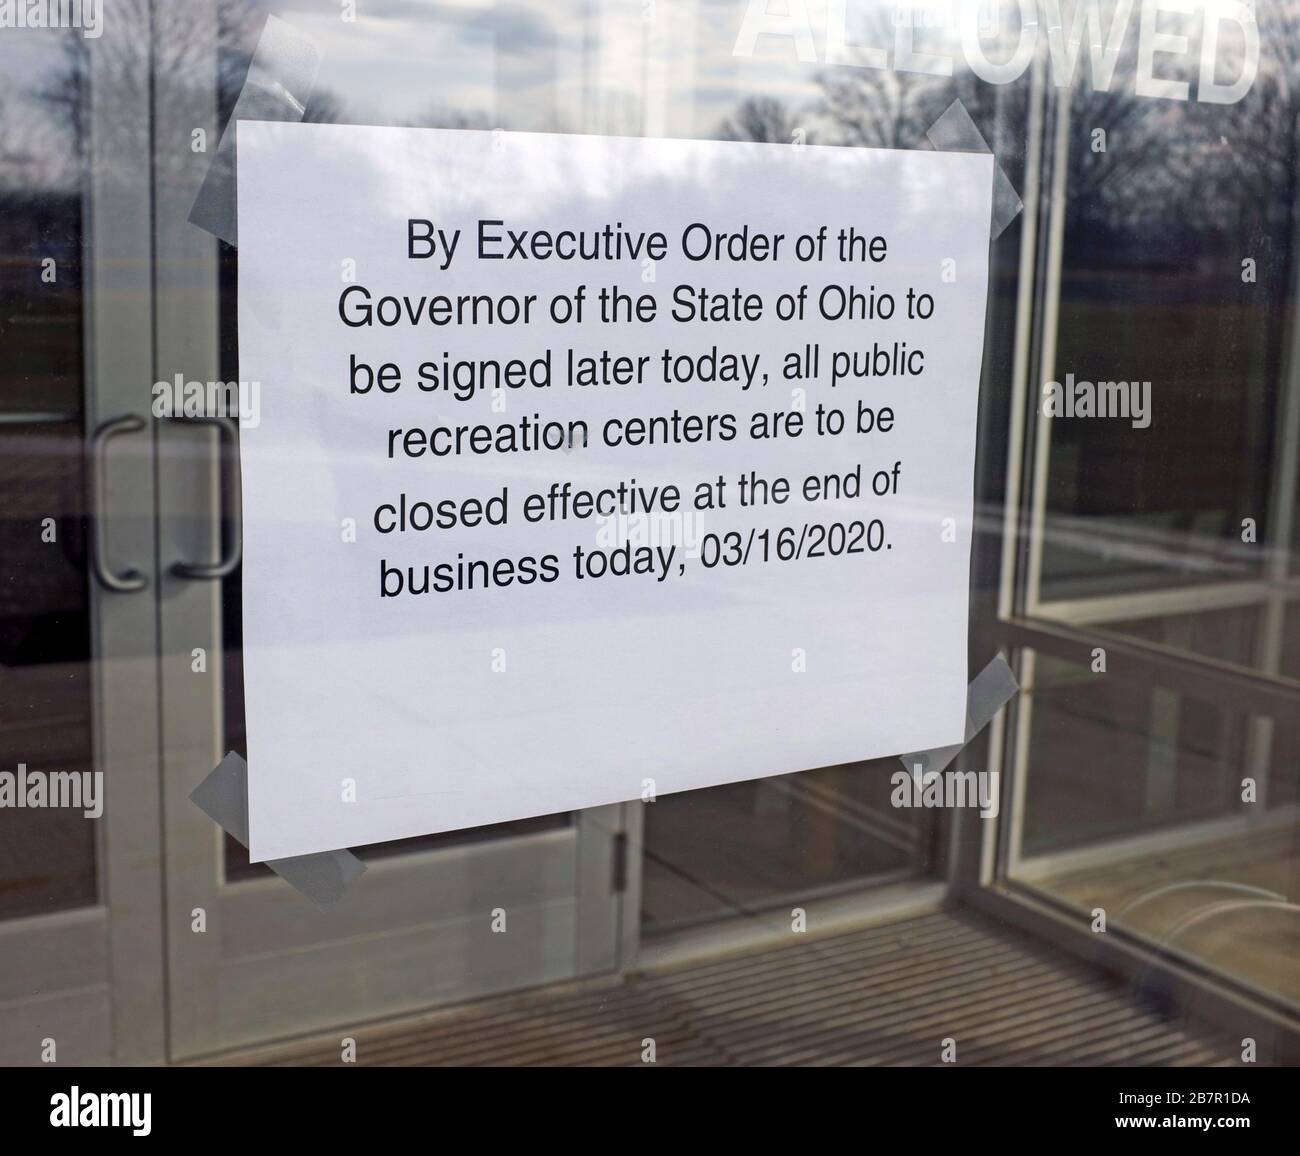 March 16, 2020 executive Order of the Ohio State Governor mandating all public recreation centers close indefinitely due to the coronavirus outbreak. The order is posted at the entrance of the Bonde Activities Center in Willowick, Ohio, USA. Stock Photo